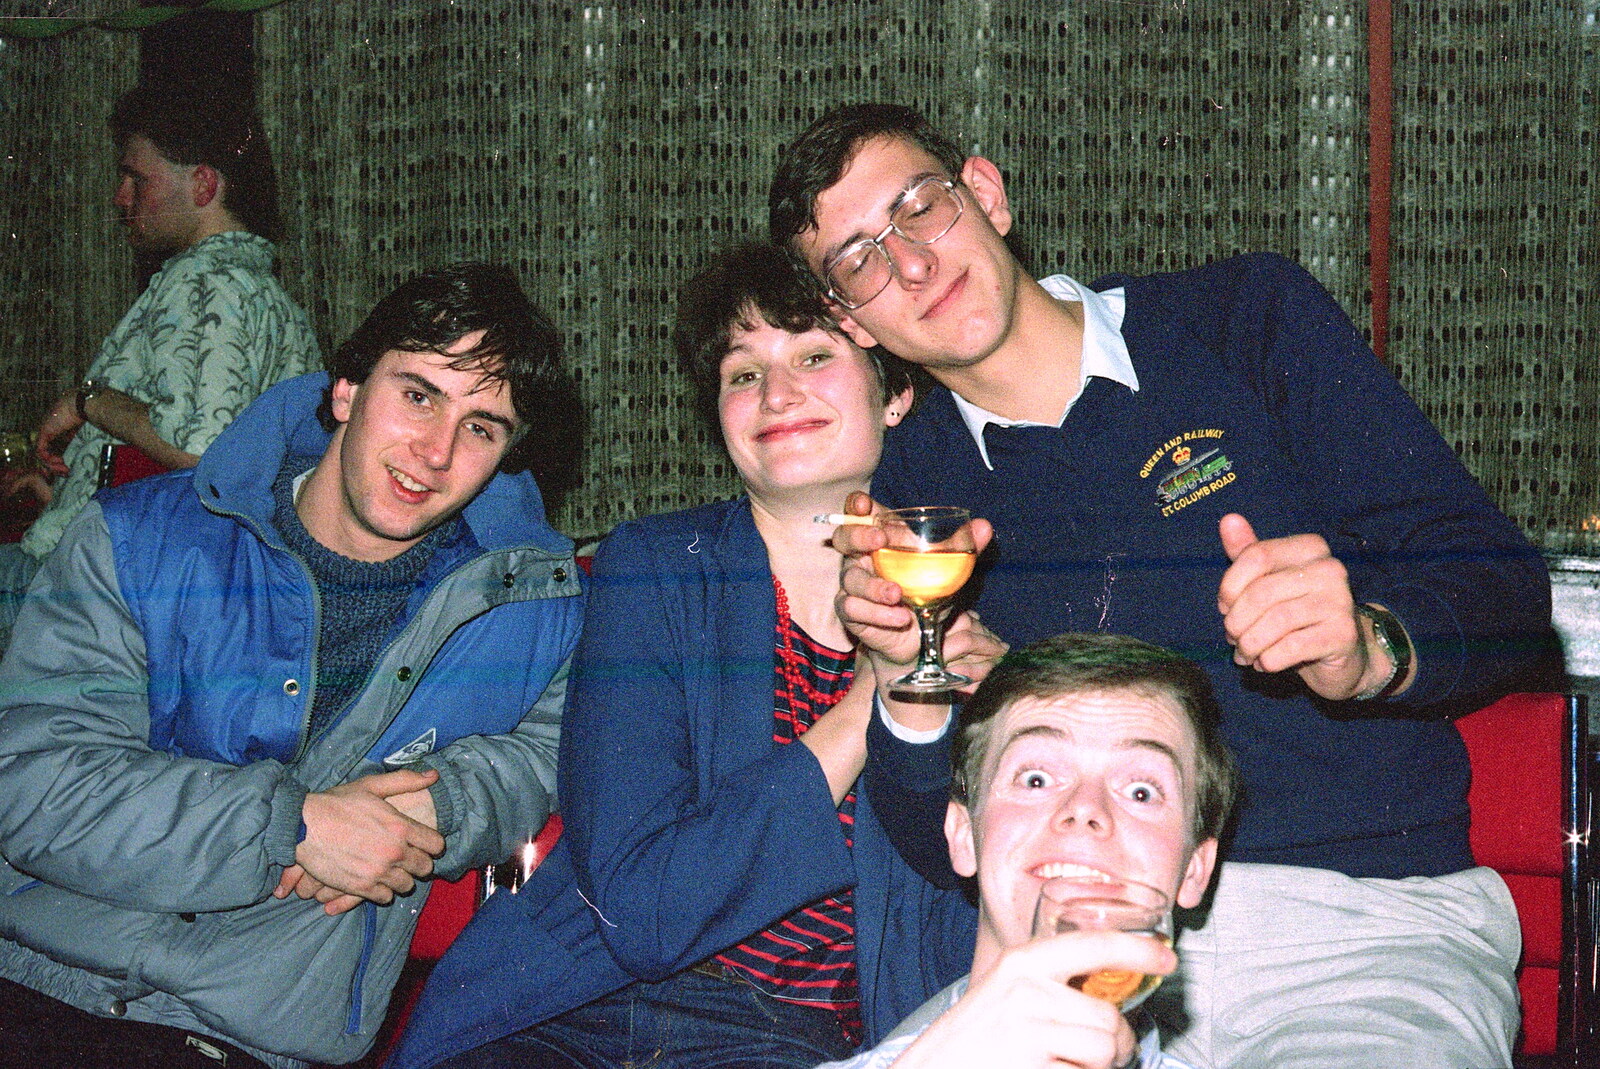 Rik, Angela, Andy and Dave from Uni: The Fly Christmas Party and BABS Panto, Plymouth Polytechnic, Devon - December 11th 1985